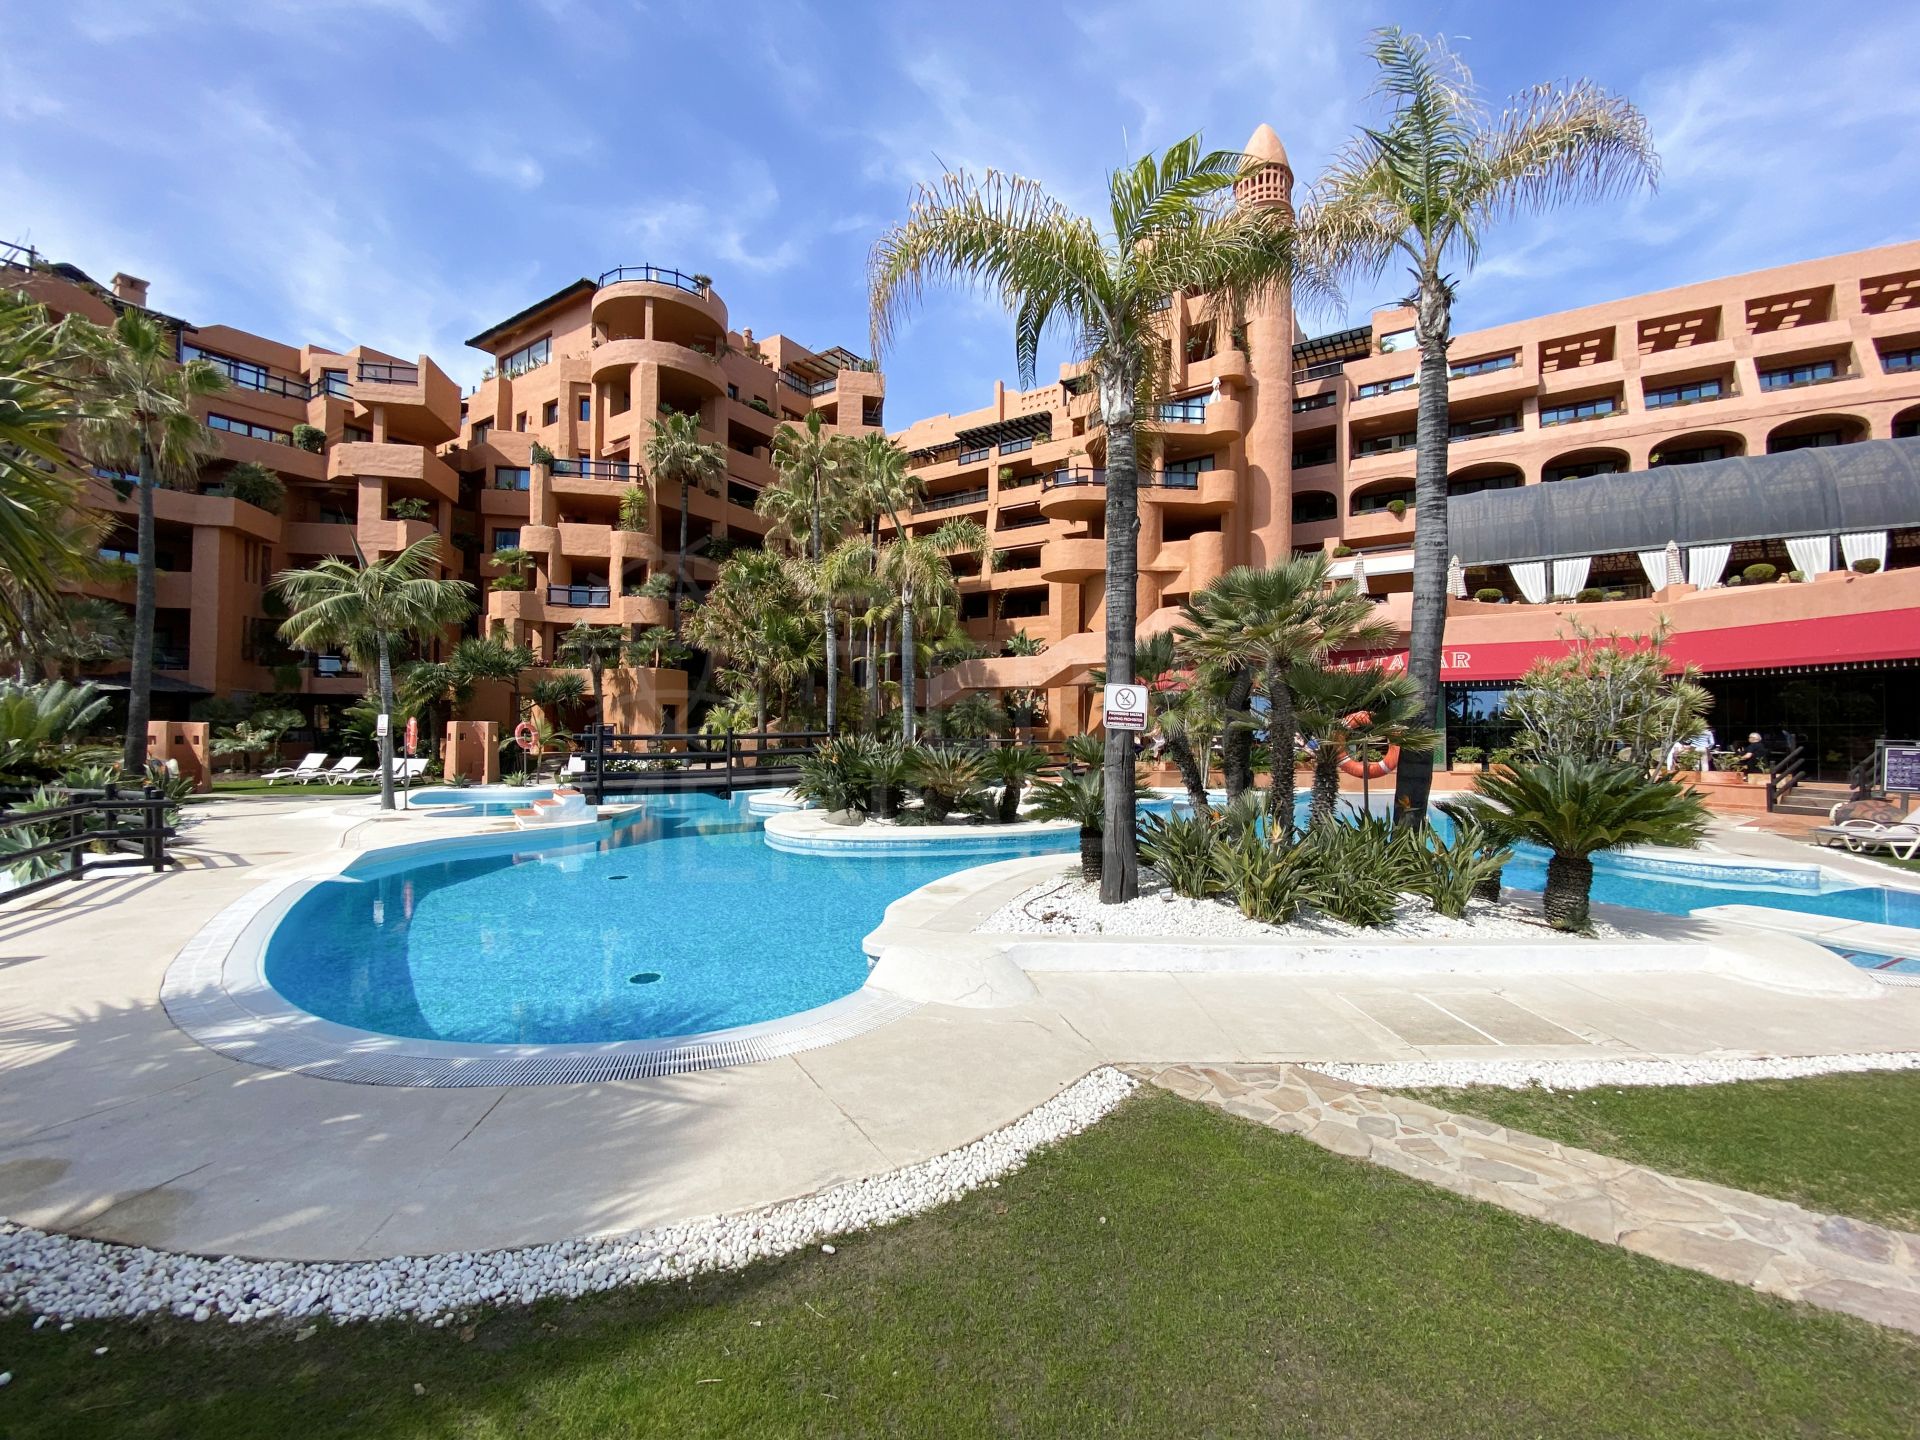 Fabulous 1 bedroom apartment with panoramic sea views for sale in the Hotel Kempinski, Estepona